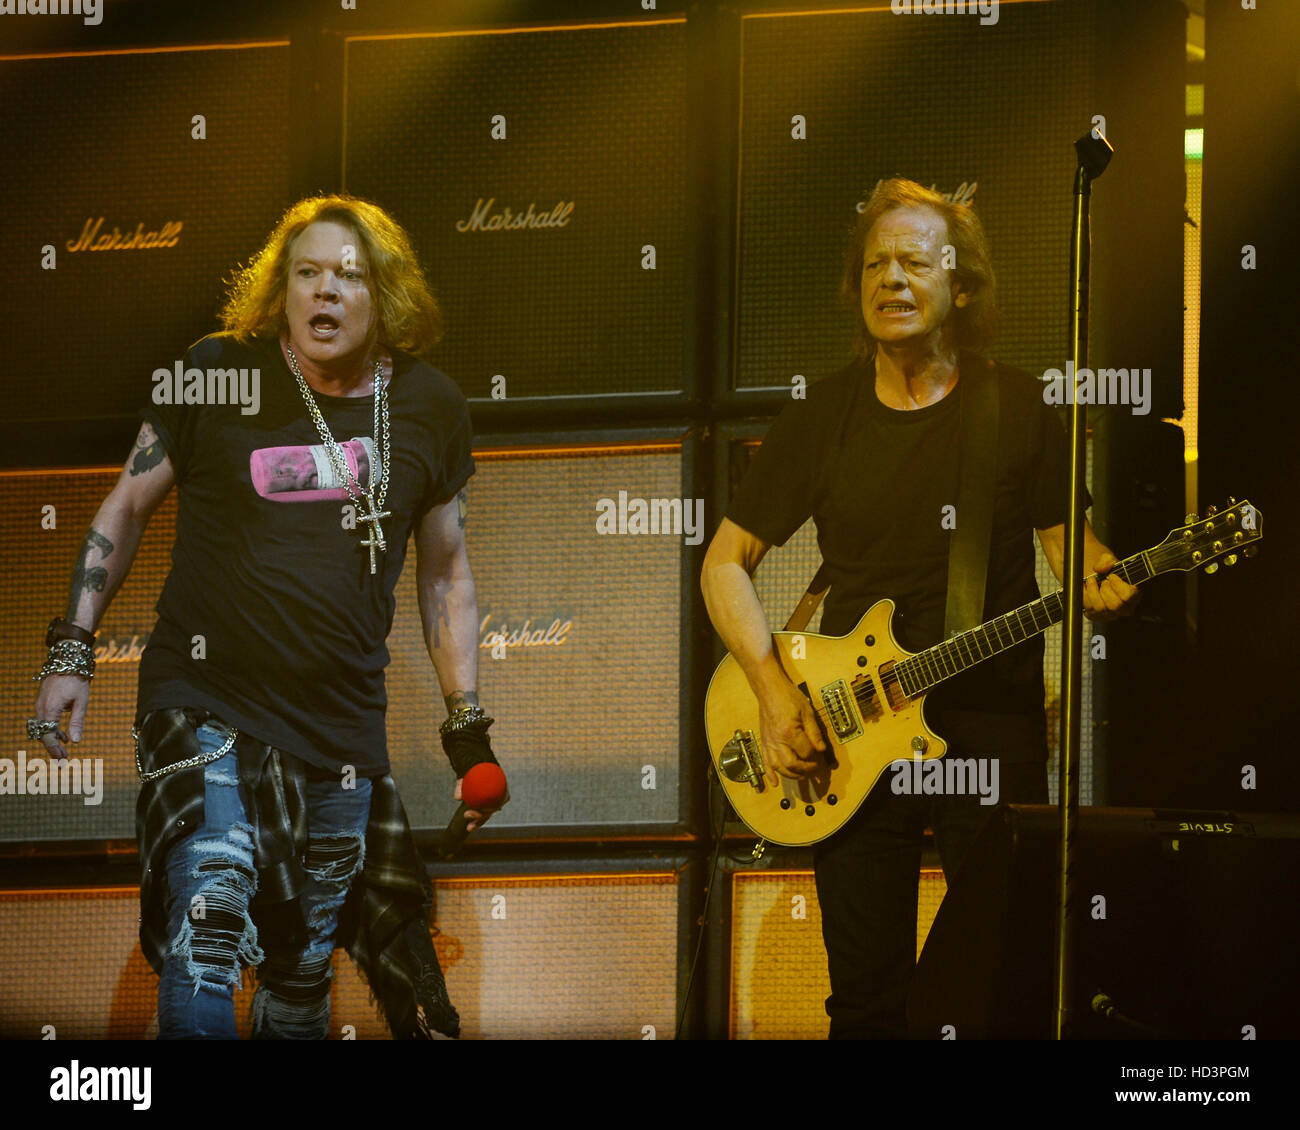 AC/DC perform live in concert Featuring: Axl Rose, Stevie Young Where:  Sunrise, Florida, United States When: 31 Aug 2016 Stock Photo - Alamy